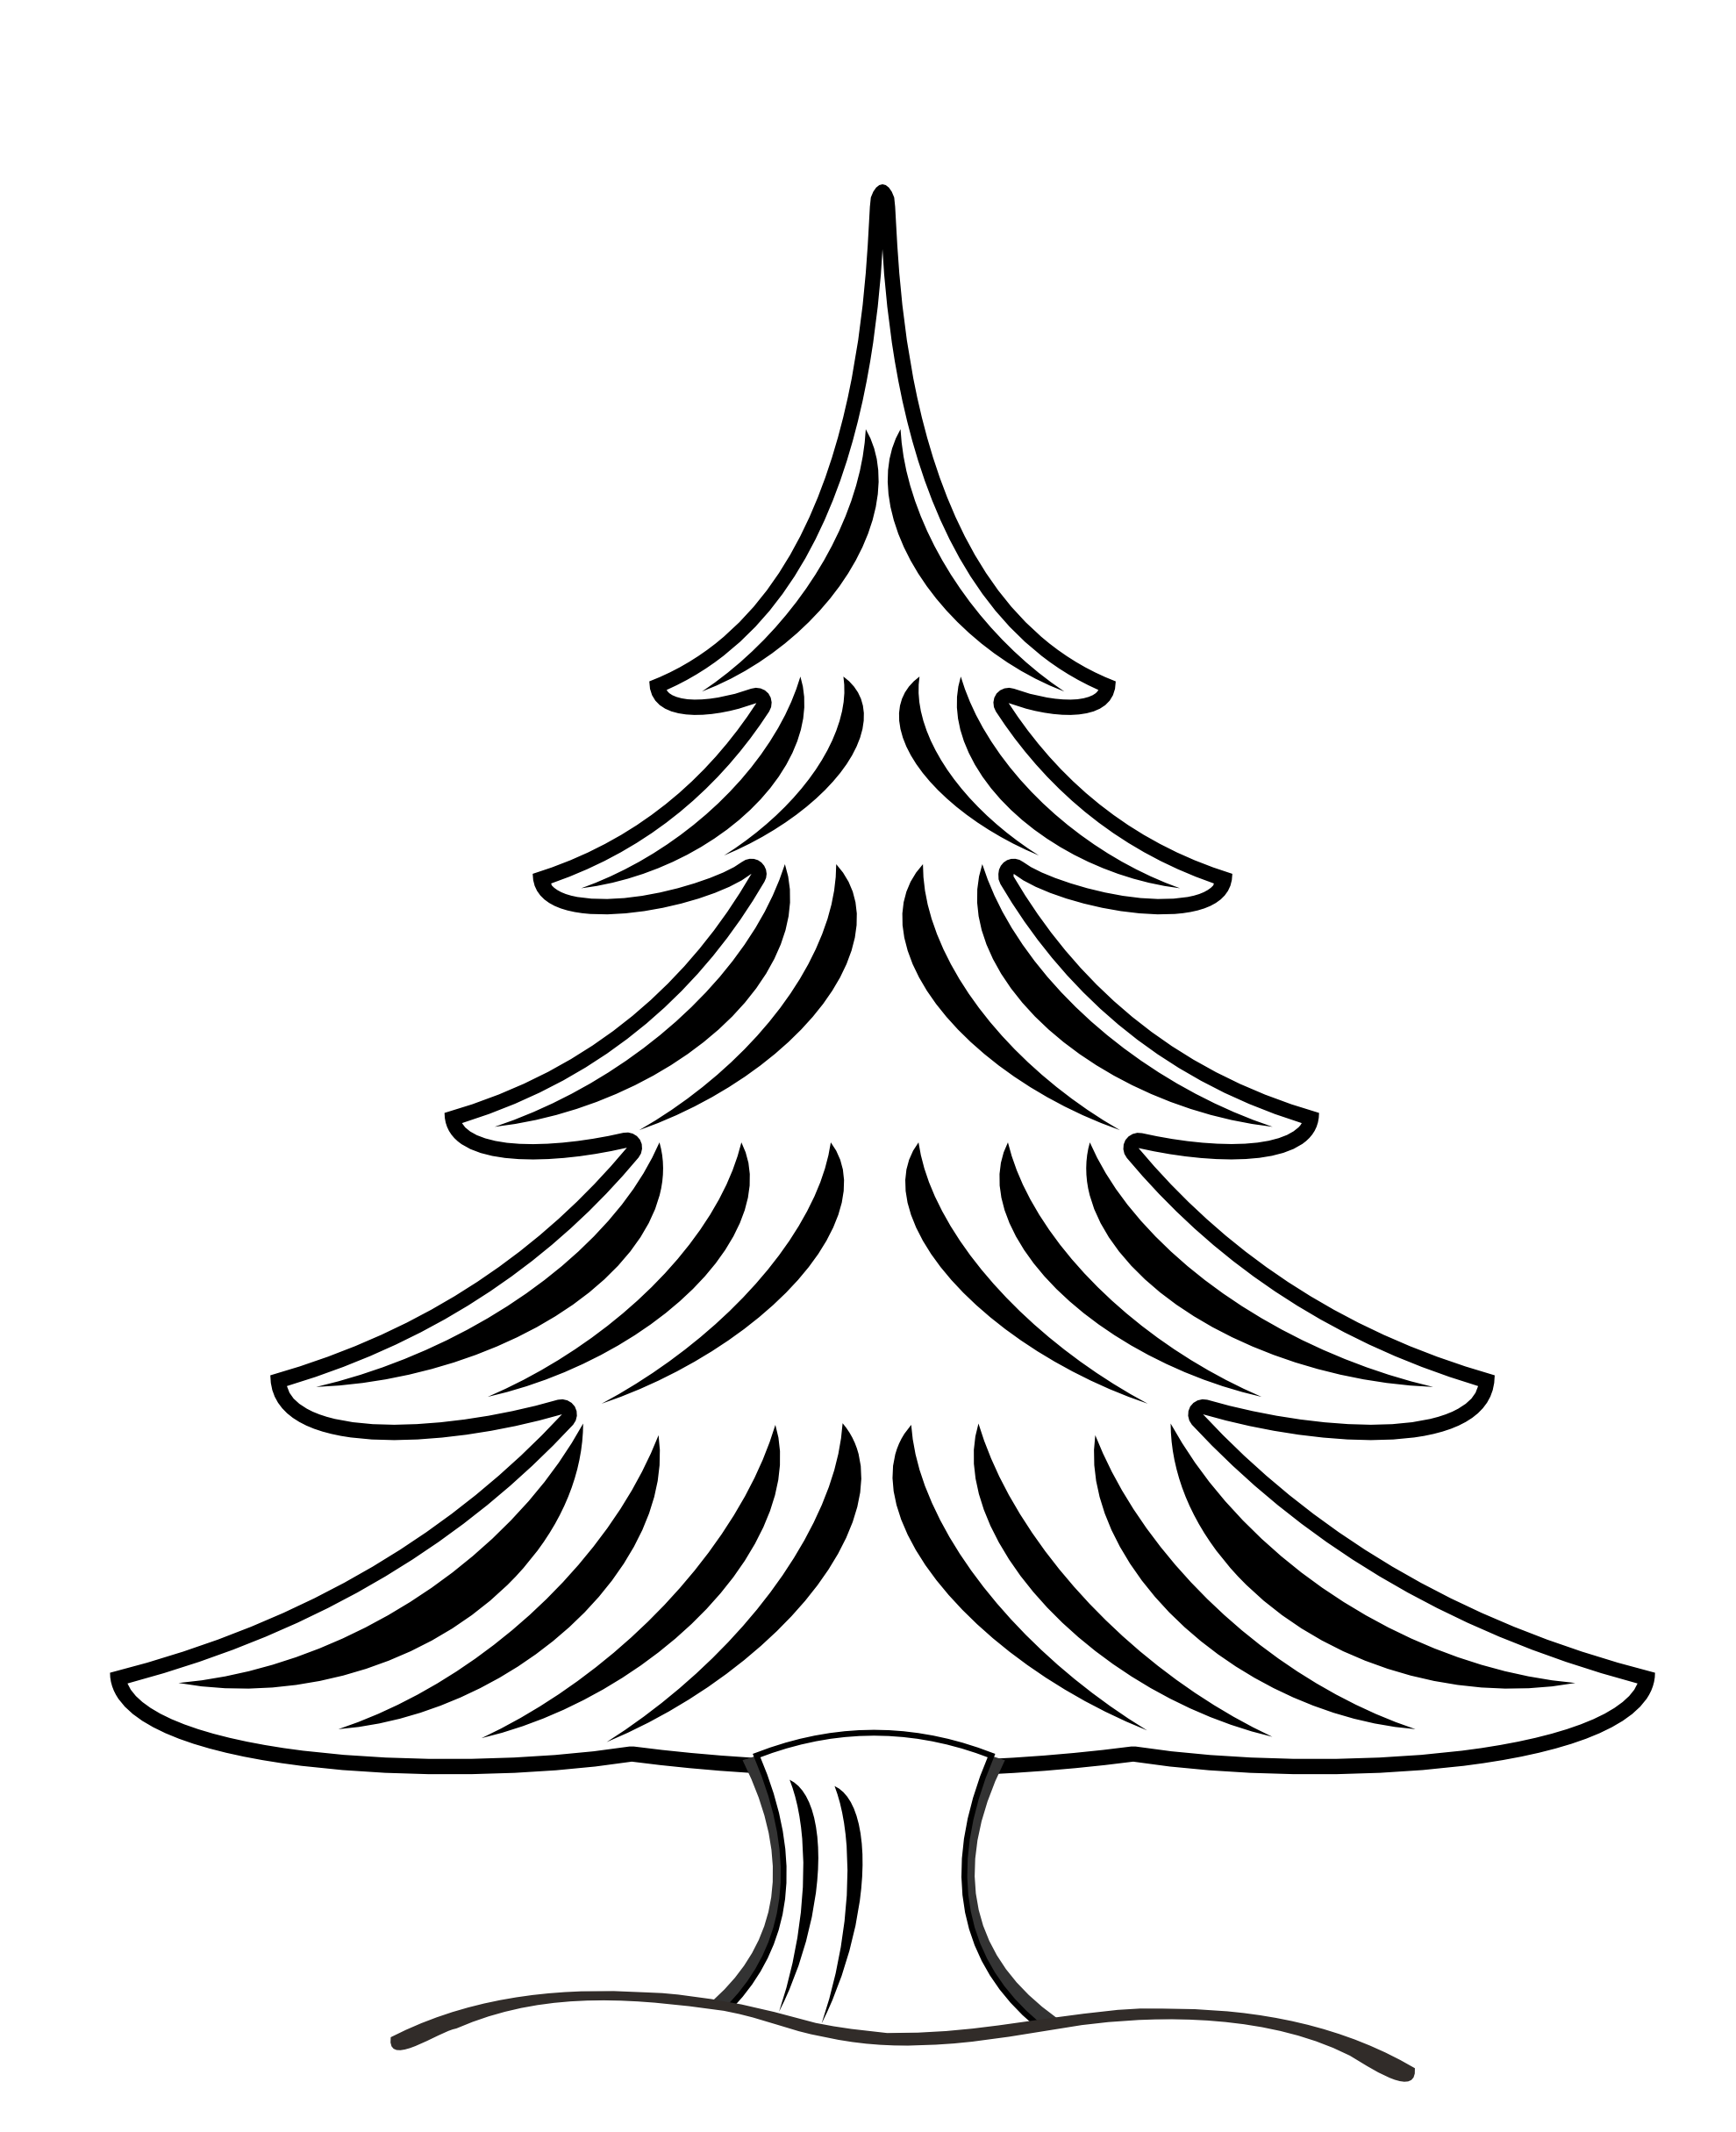 Snow christmas tree clipart black and white